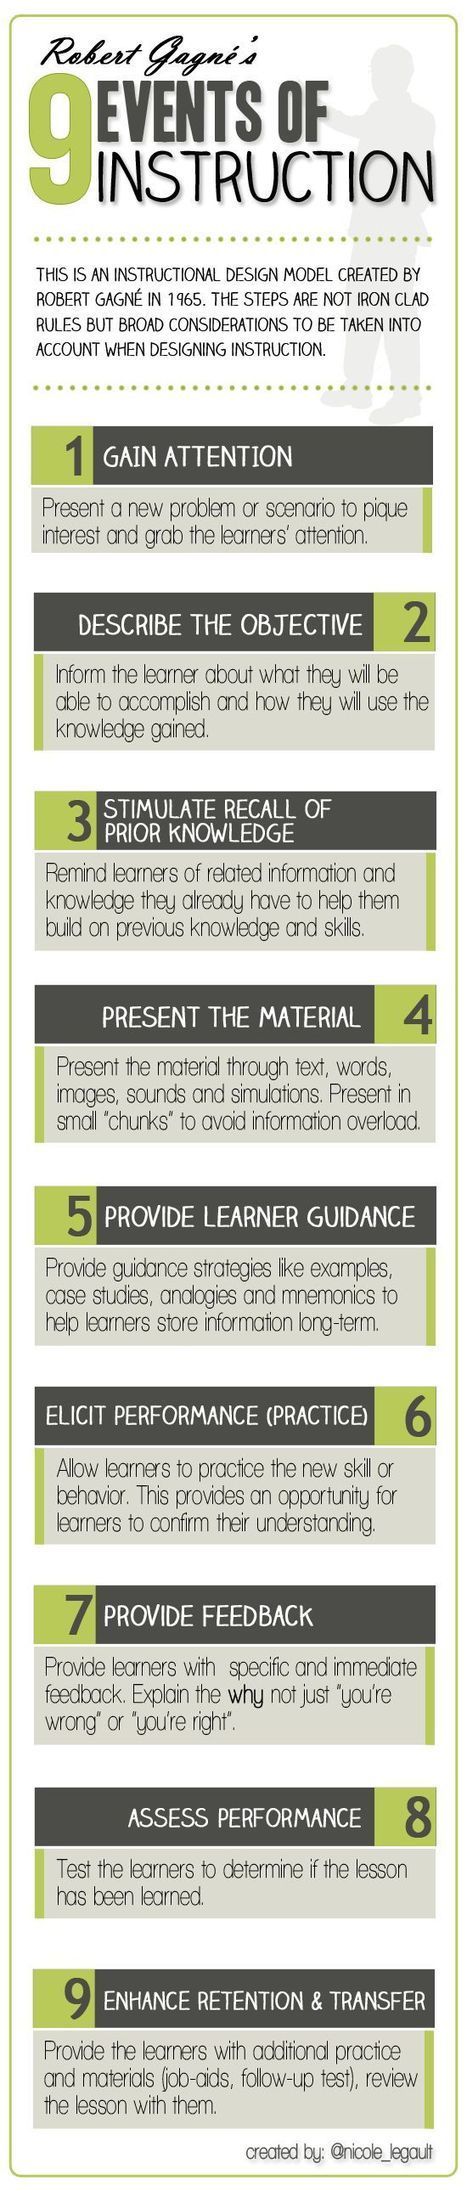 Learning - Robert Gagne's 9 events of instruction | Information and digital literacy in education via the digital path | Scoop.it